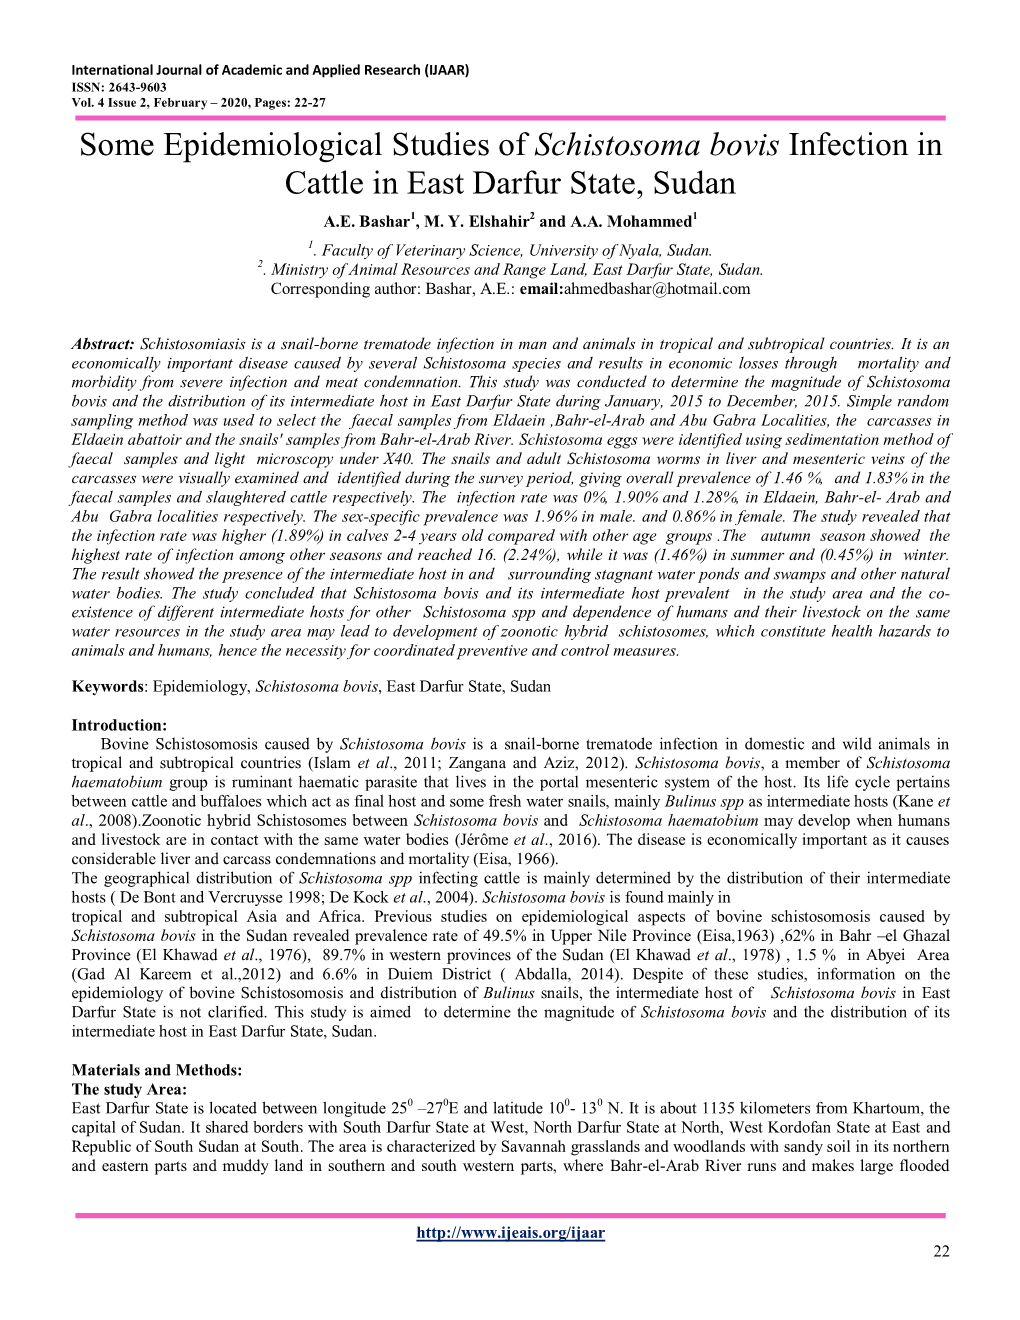 Some Epidemiological Studies of Schistosoma Bovis Infection in Cattle in East Darfur State, Sudan A.E